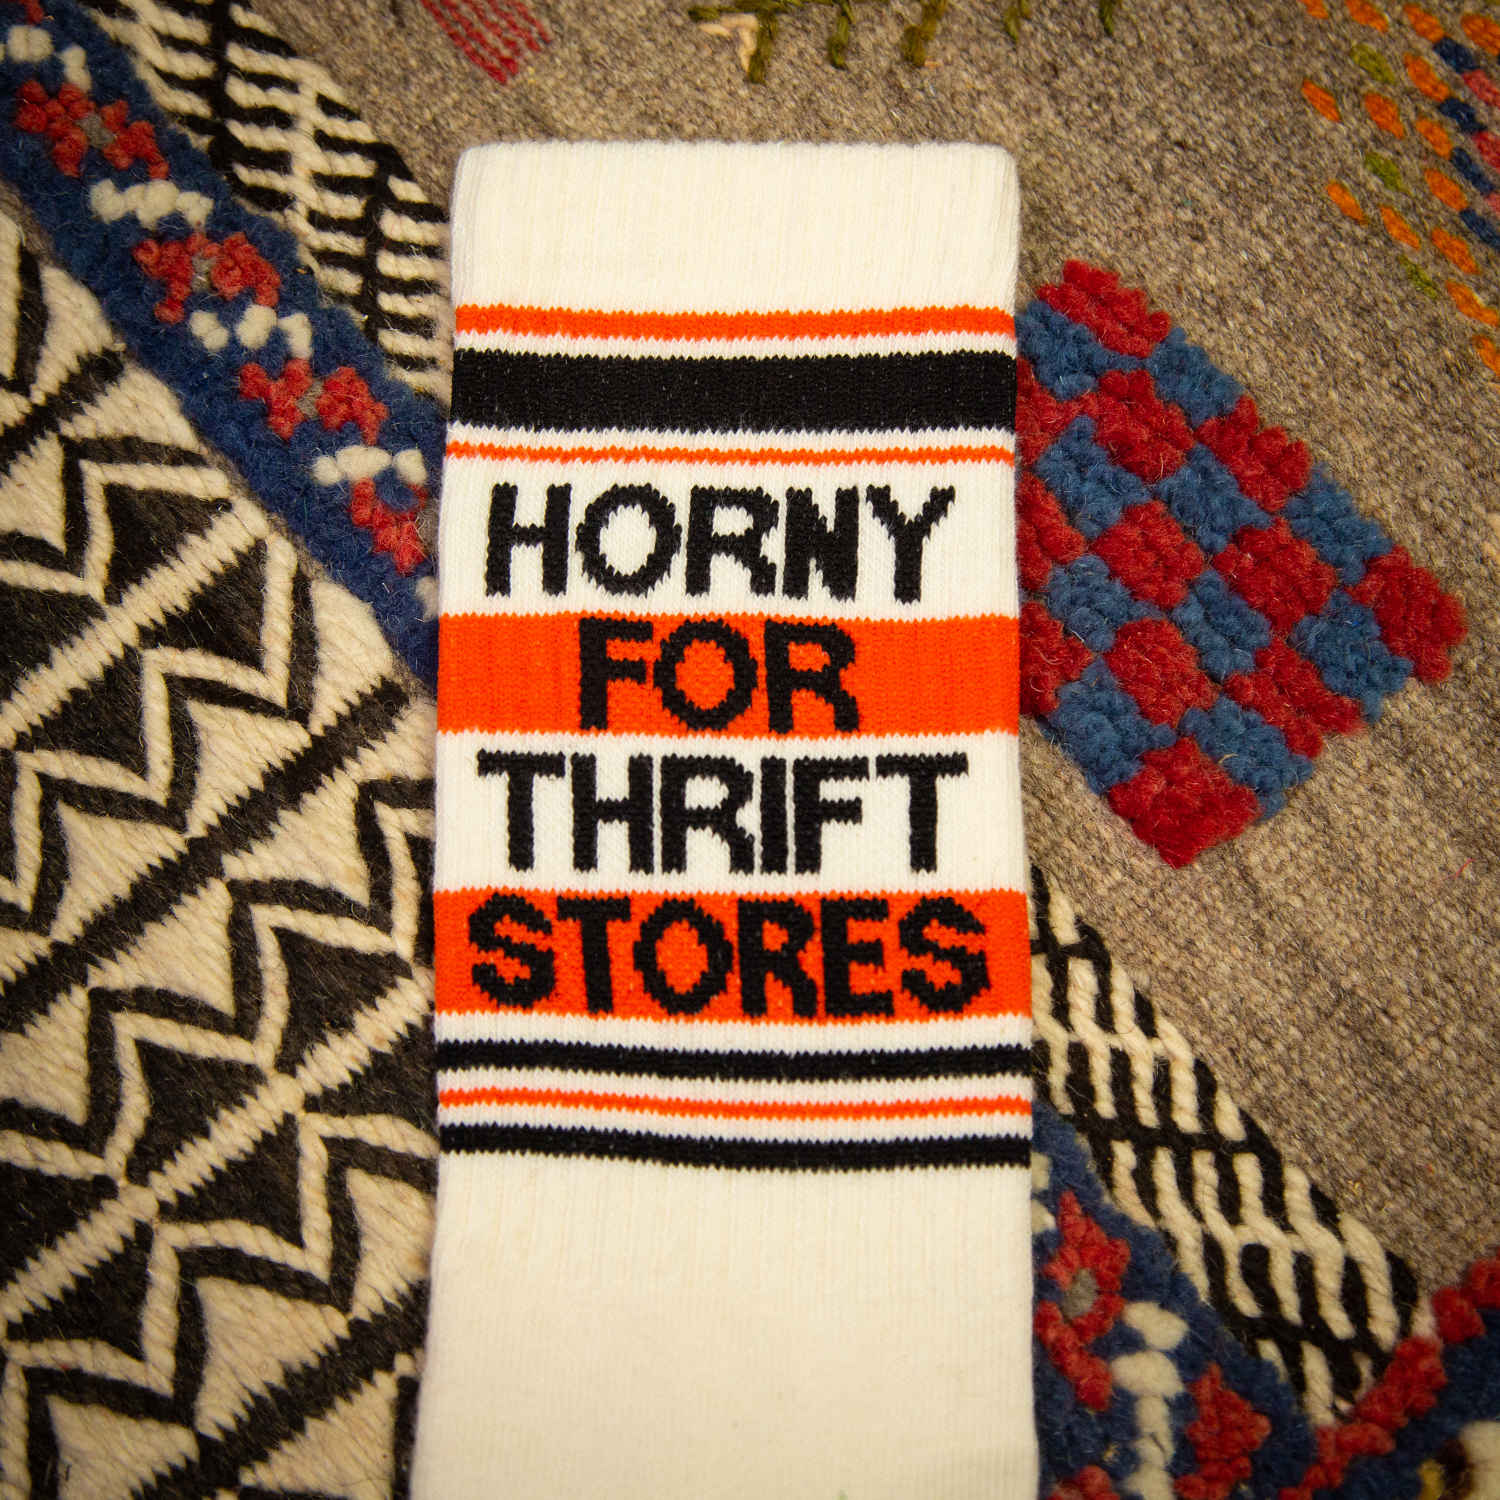 An off-white and red crew sock that read "horny for thrift stores."